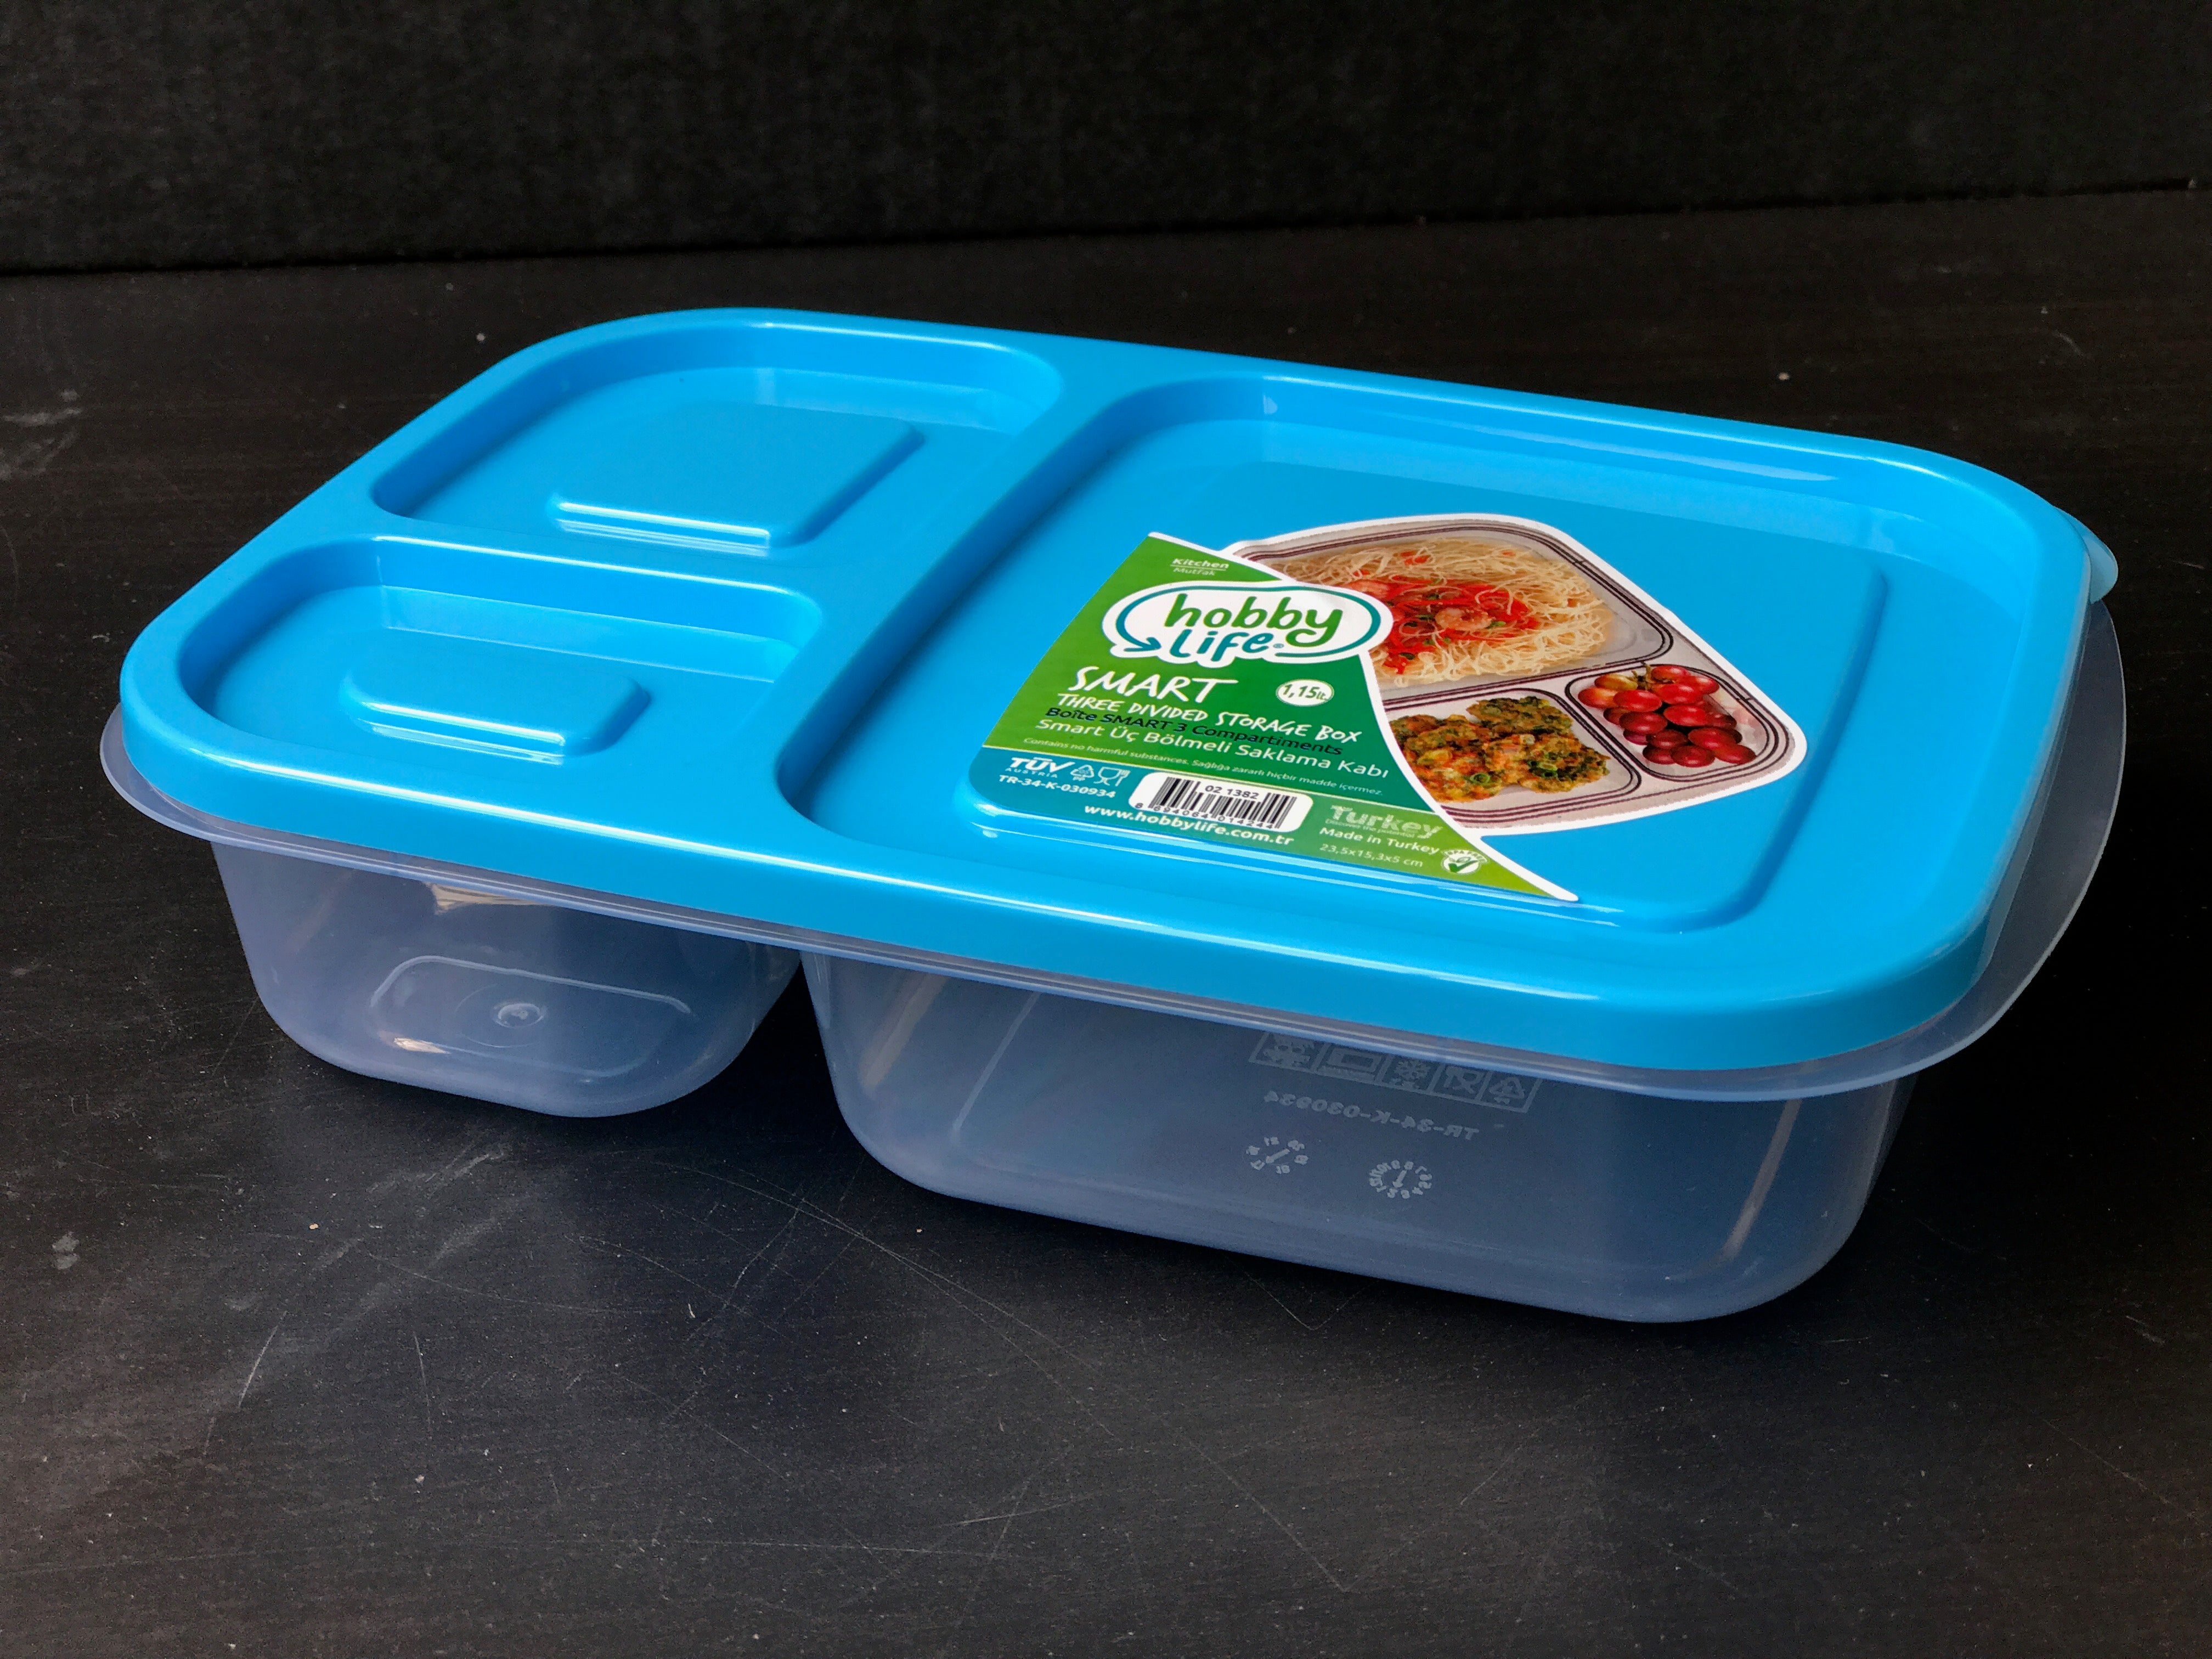 W02-1383 Smart 3-Divided Food Storage Box 3 pcs Pack (case pack 12 pc –  WEE'S BEYOND WHOLESALE